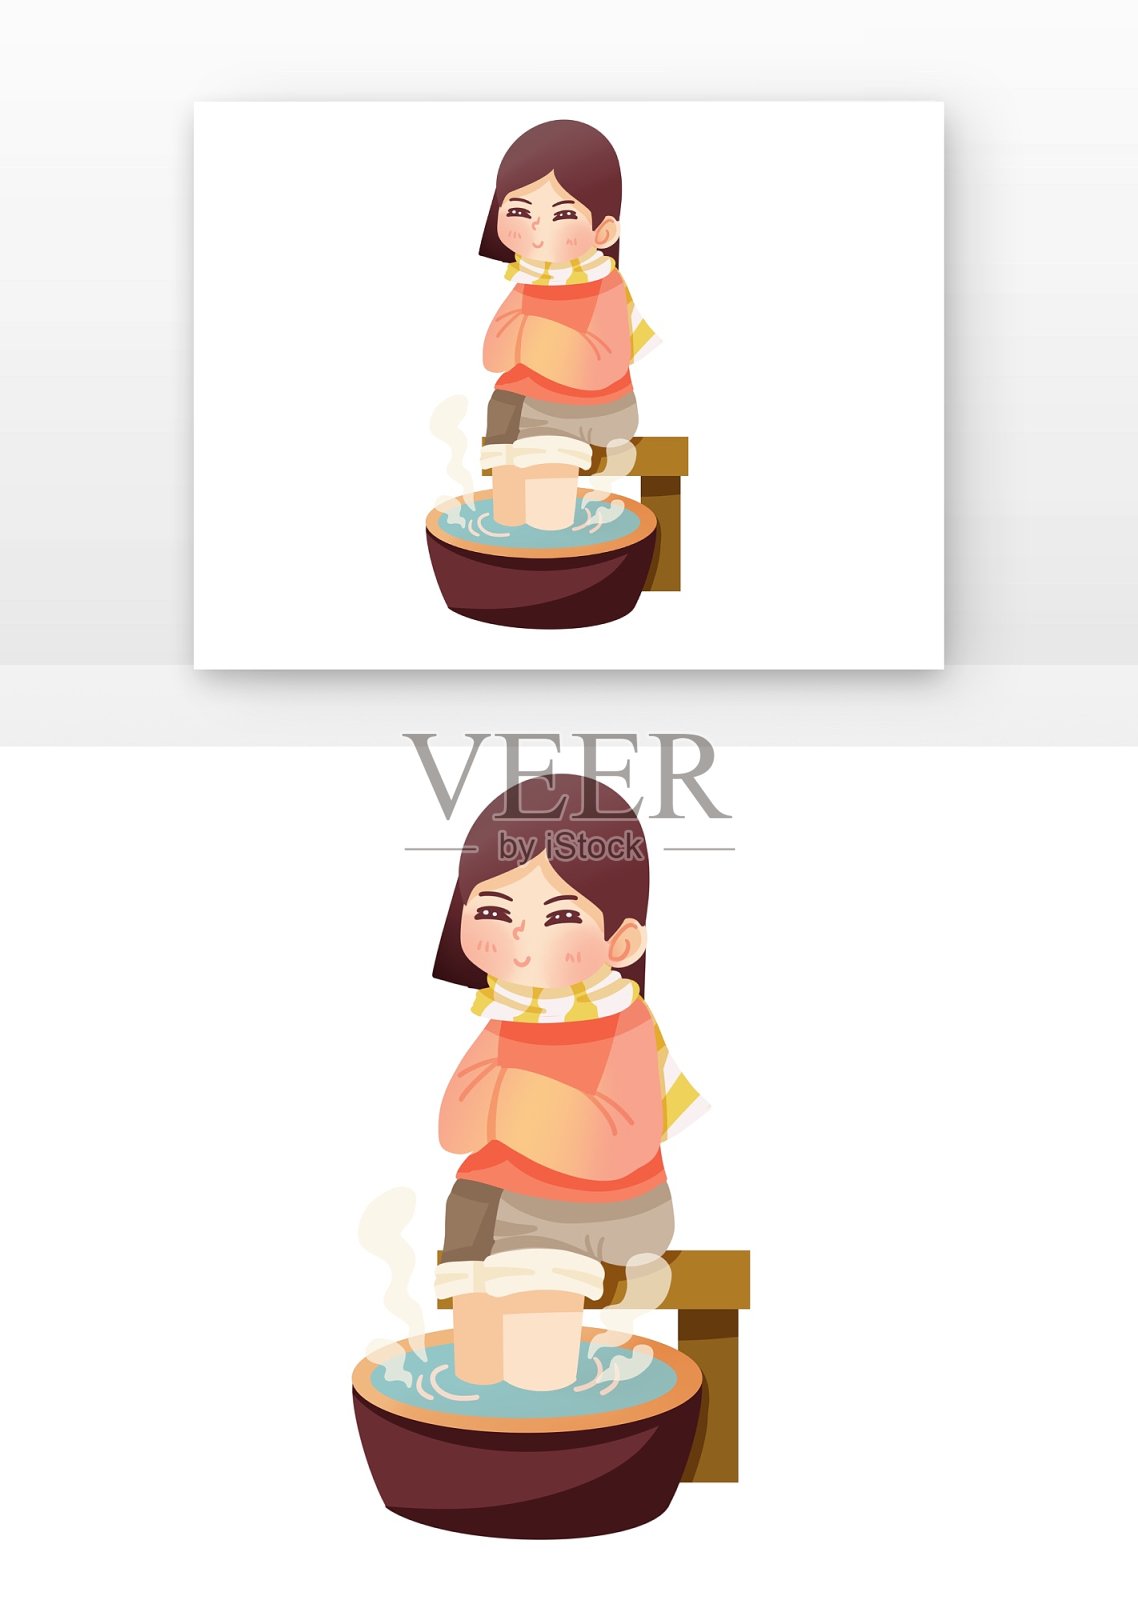 Washing Feet White Transparent, Washing Feet Filial Mother Warm Family And Parent Child ...